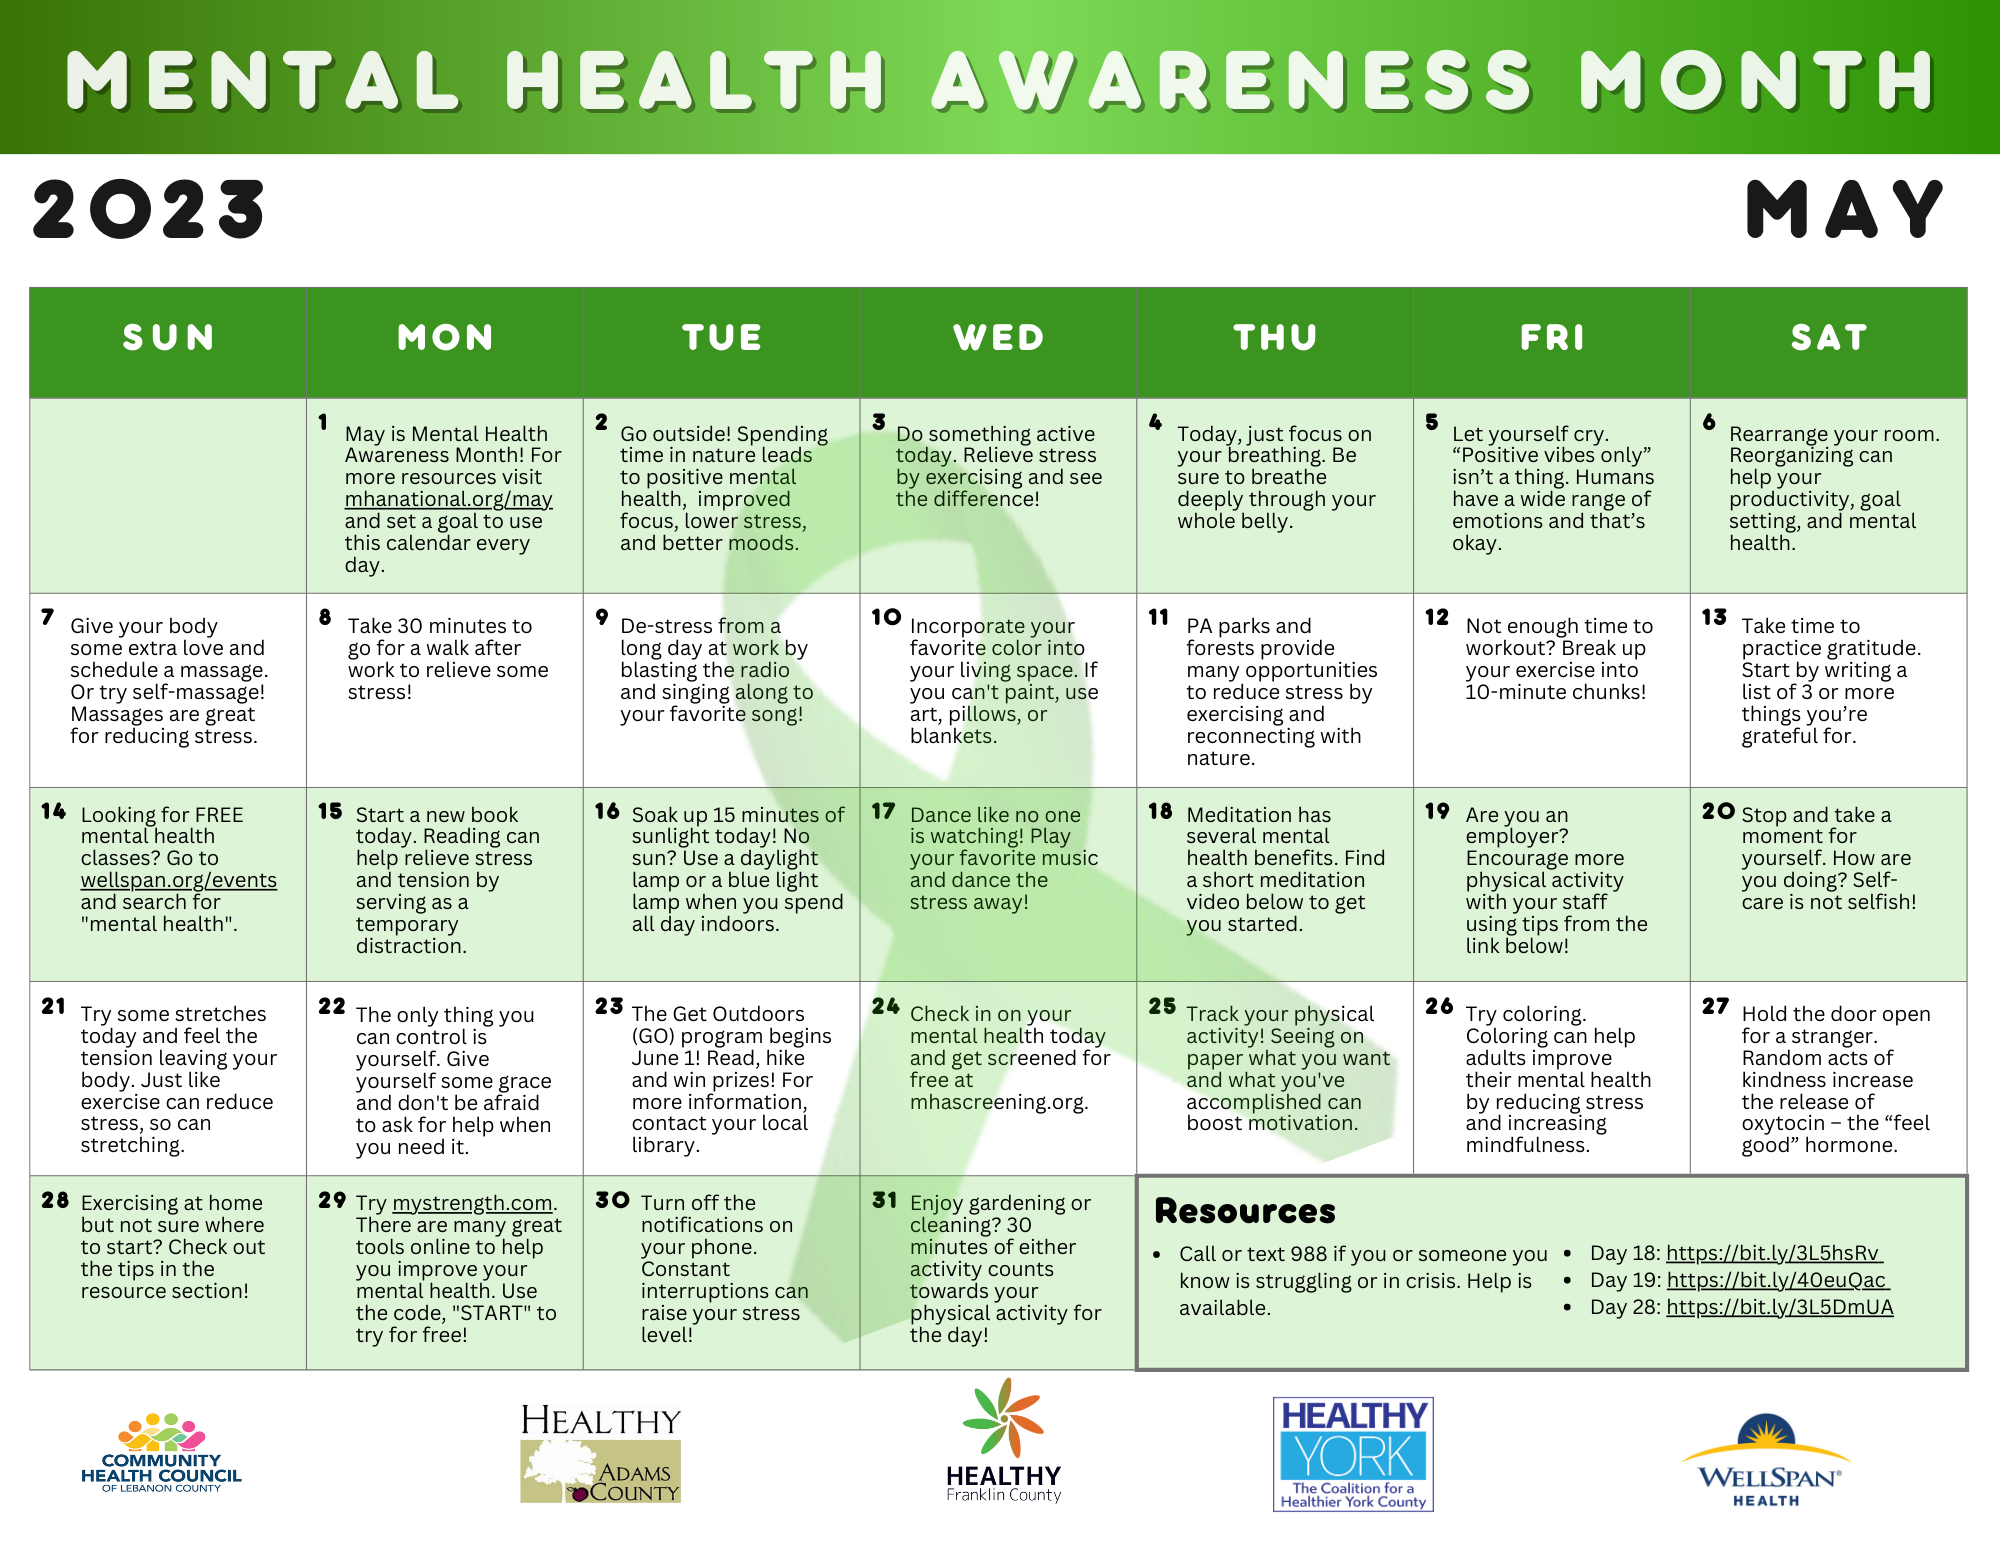 mental-health-awareness-month-2023-community-health-council-of